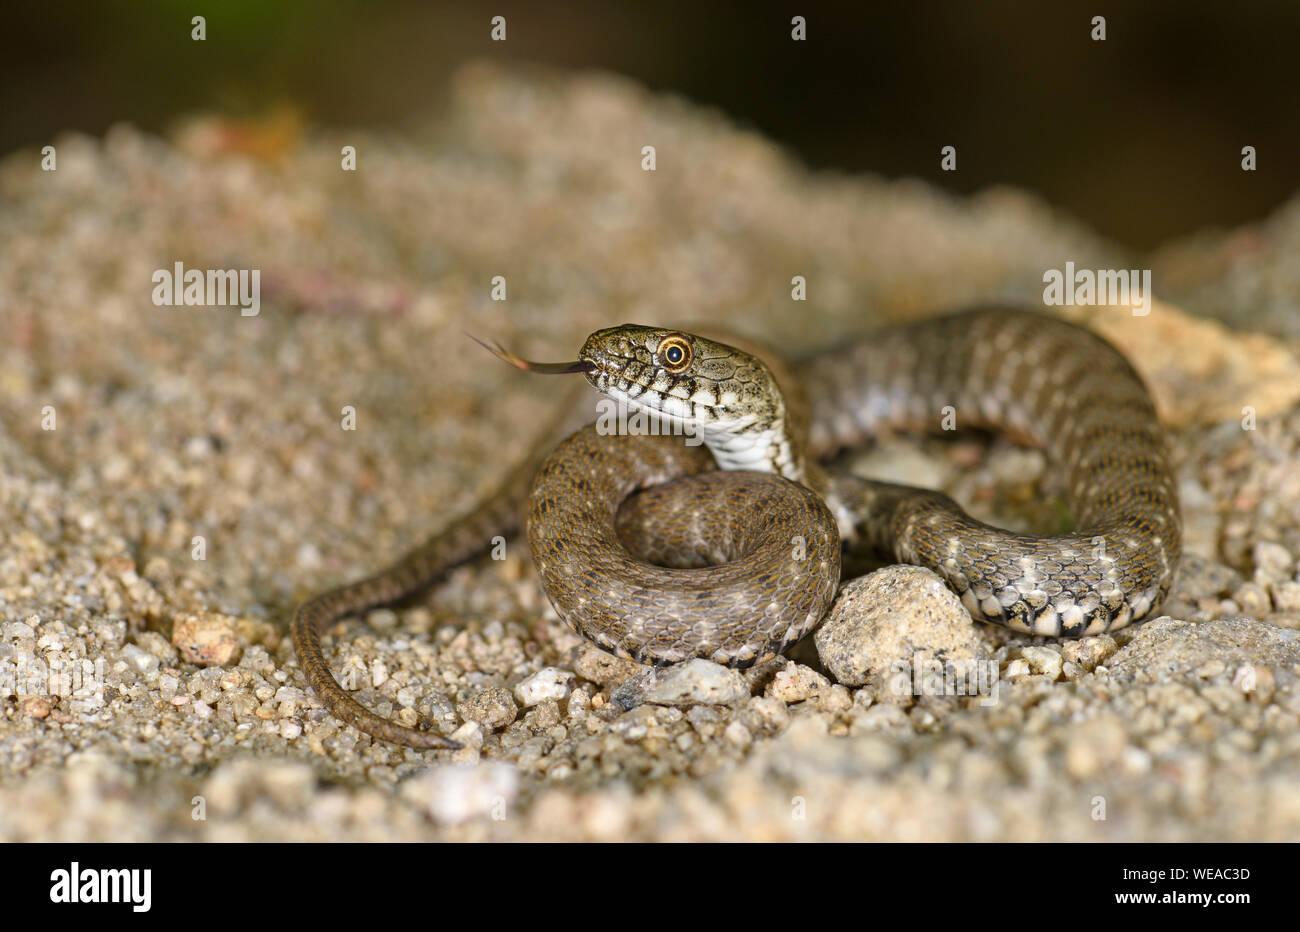 Dice Snake (Natrix tessellata) curled with tongue extended, Bulgaria, April Stock Photo